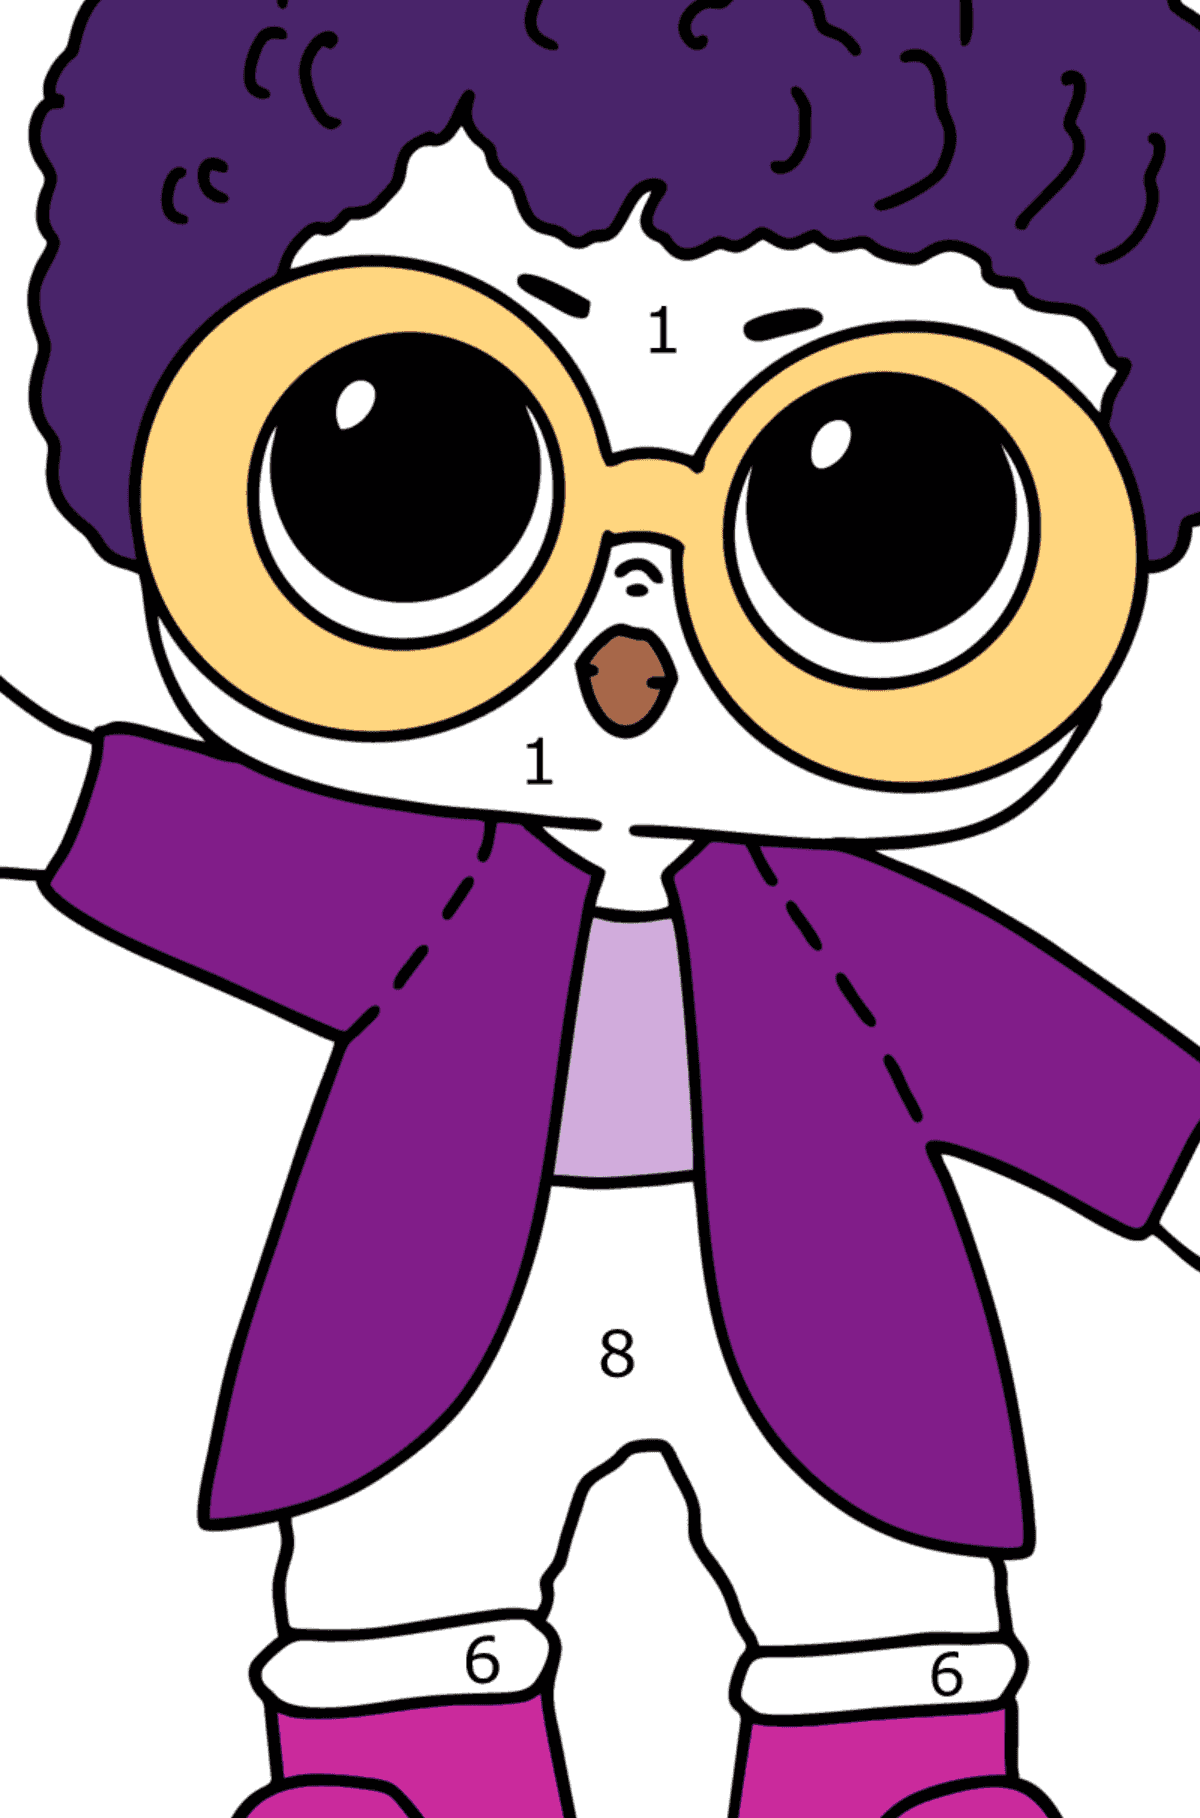 LOL Surprise Purple Reign Doll Boy coloring page - Coloring by Numbers for Kids